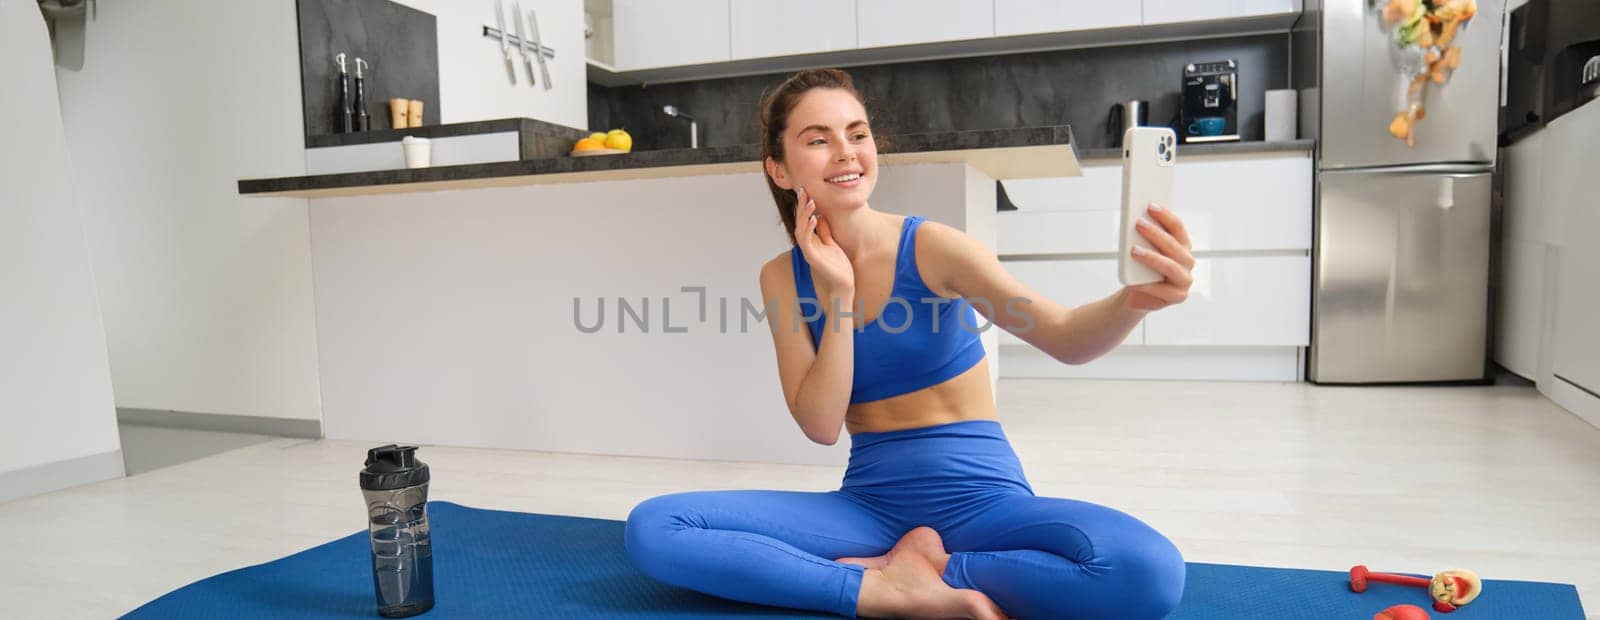 Portrait of woman workout from home, sitting on yoga mat with smartphone, taking selfie on mobile phone, doing exercises in her living room.